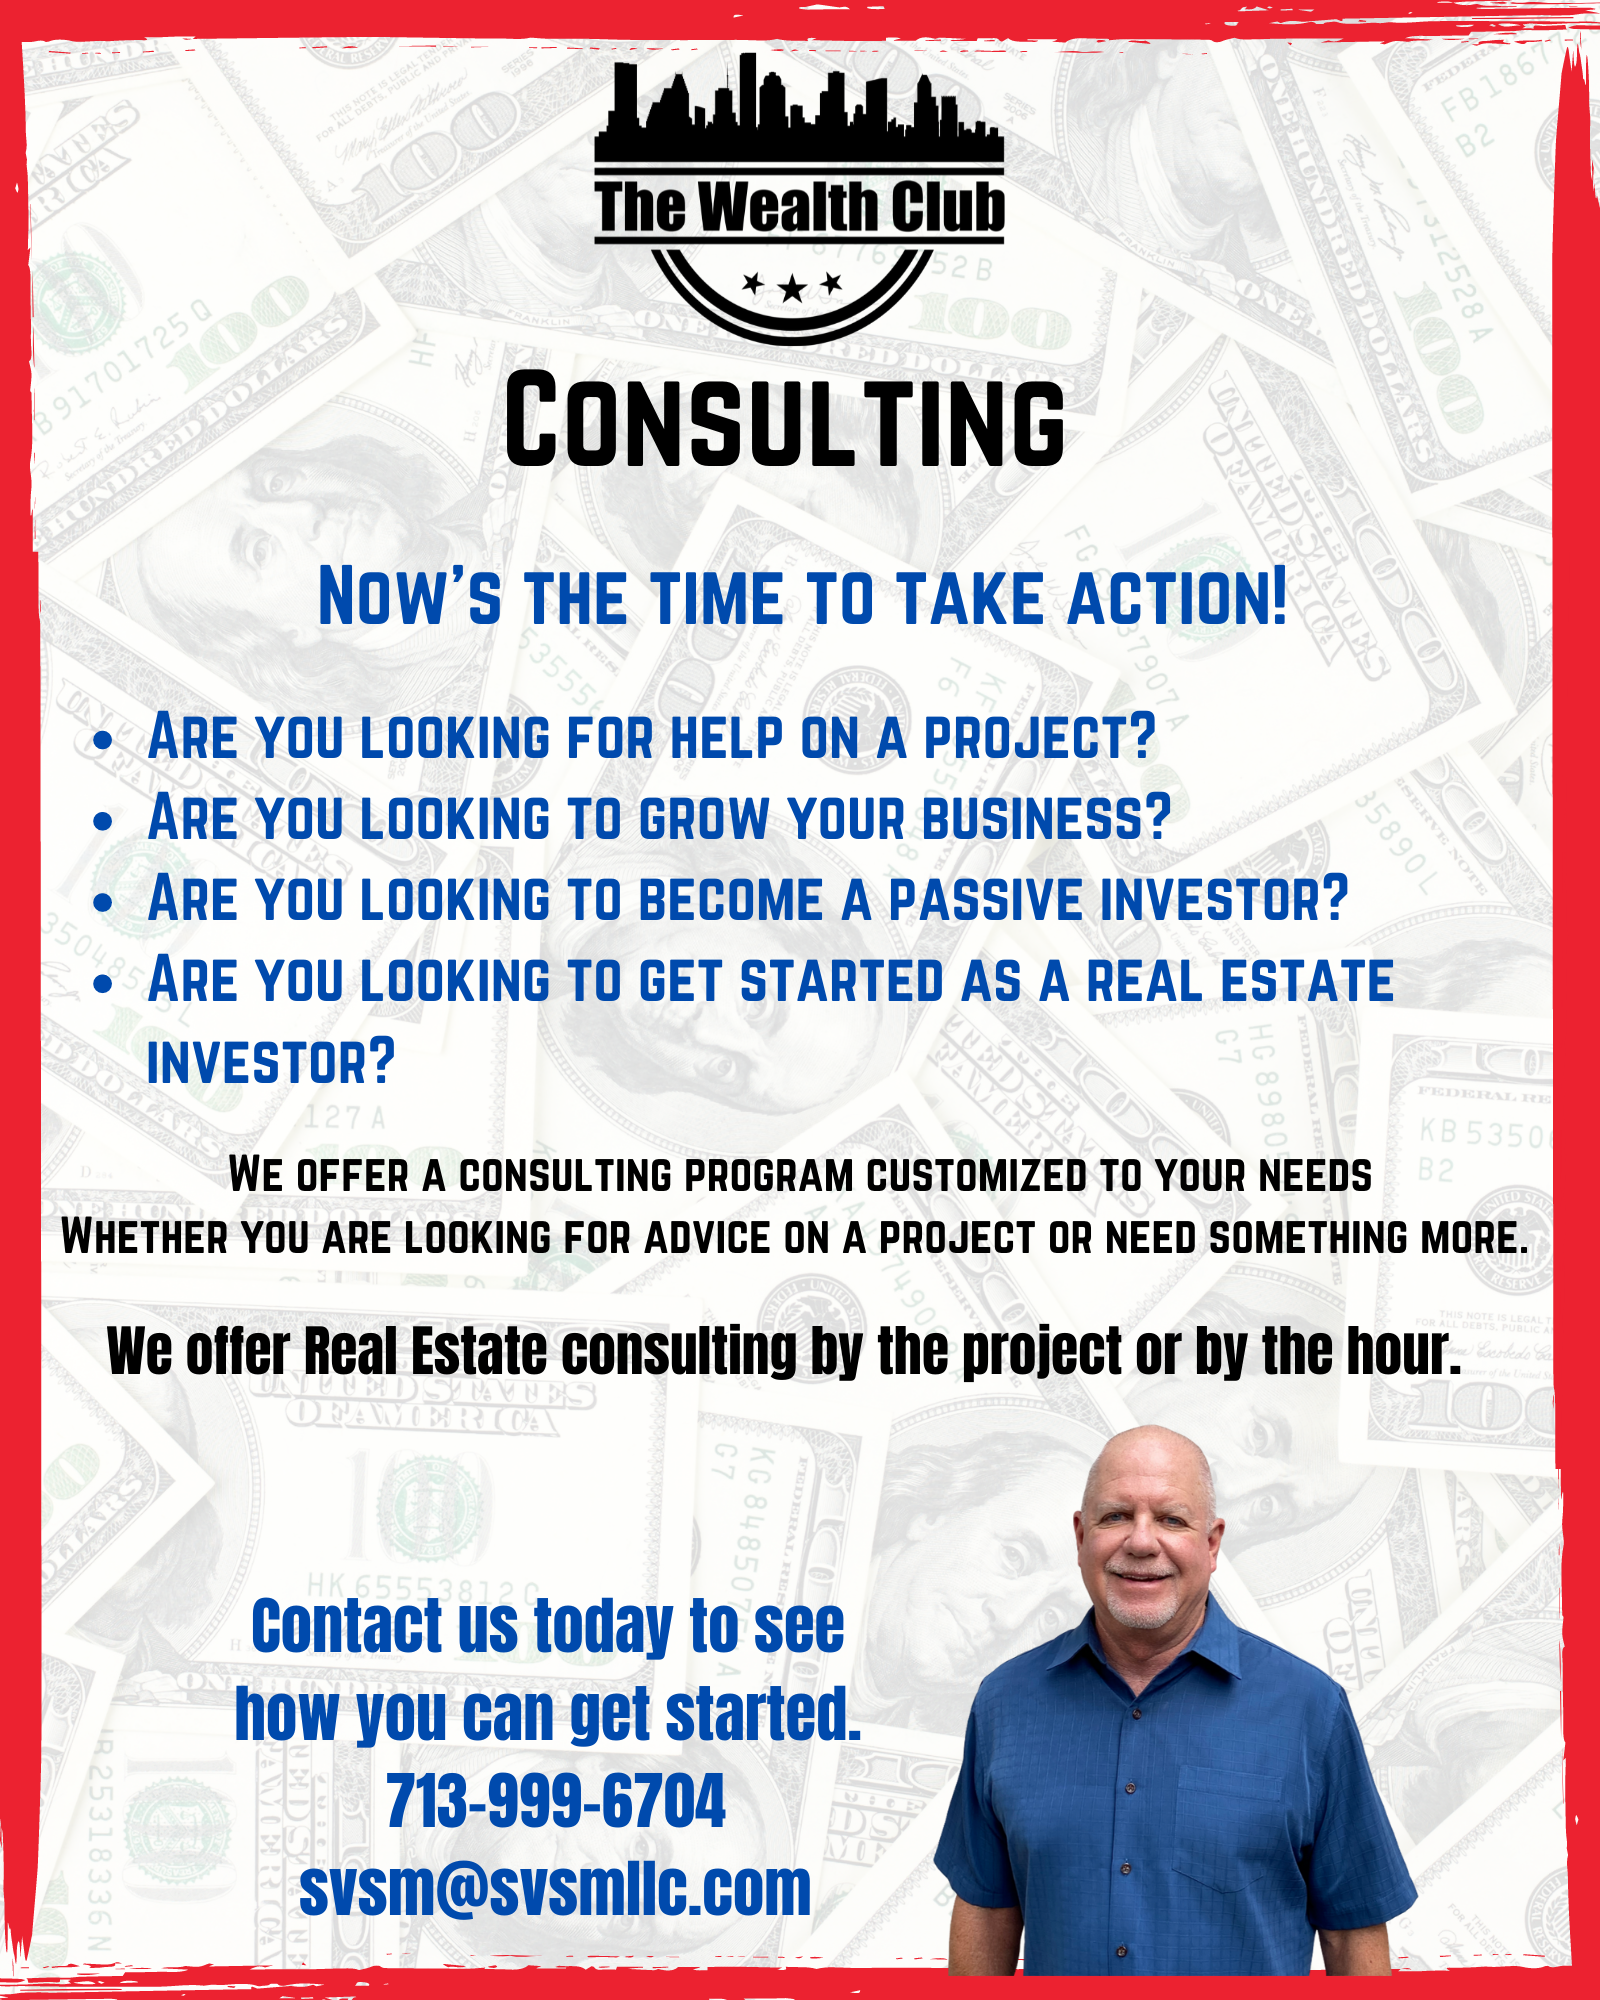 TWC Consulting Flyer